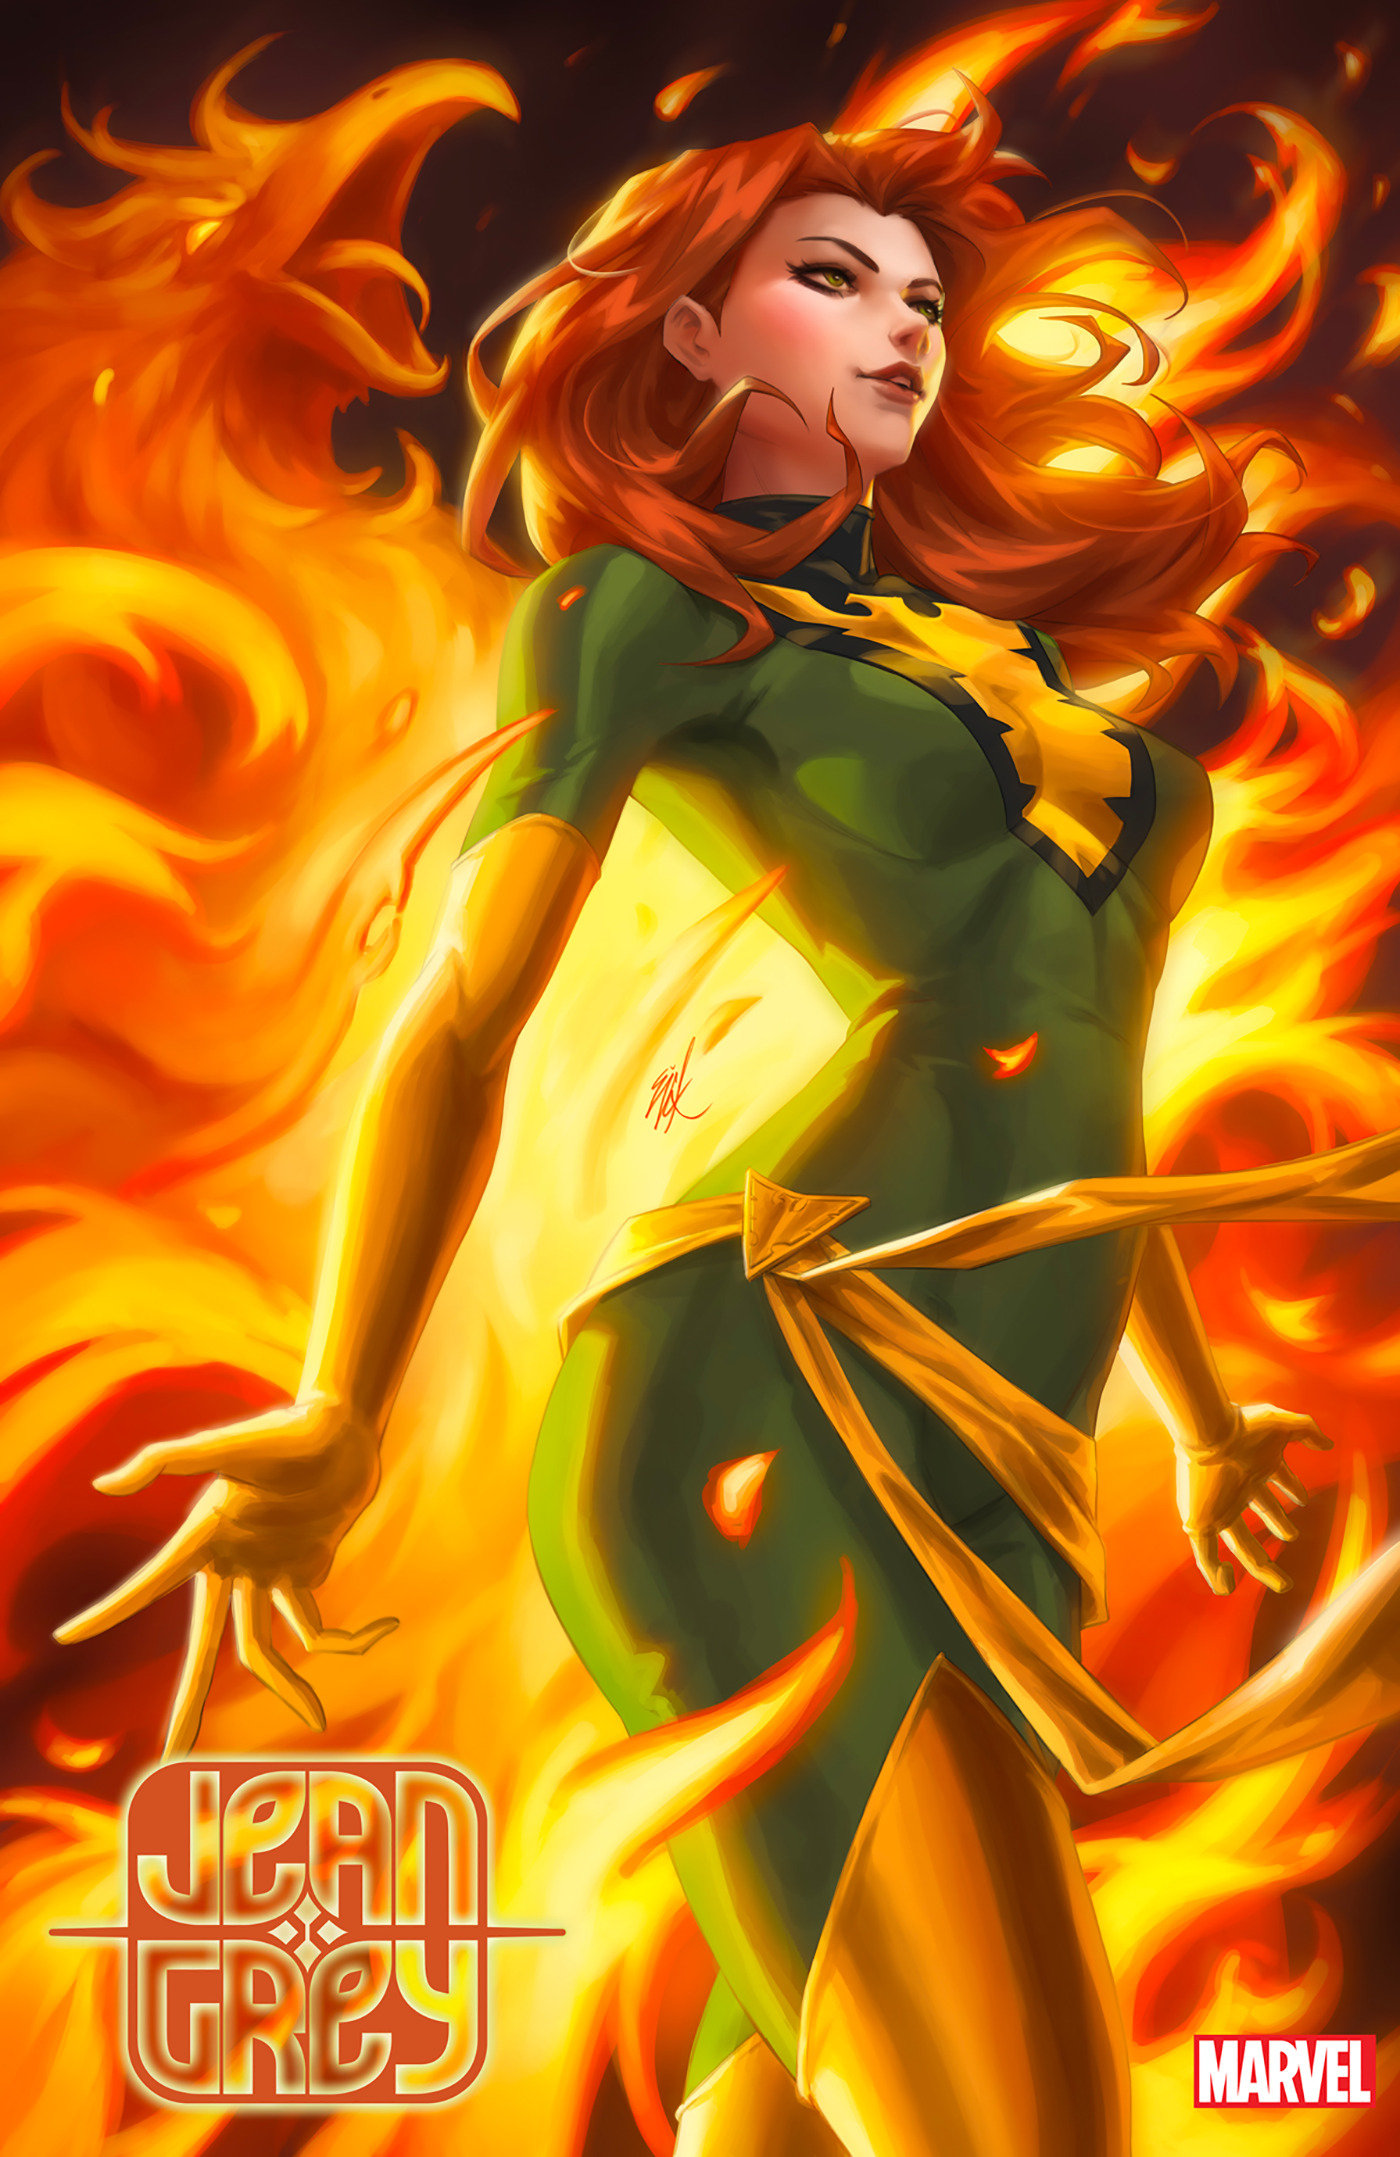 Jean Grey #2 Ejikure 1 for 25 Incentive (Fall of the X-Men)